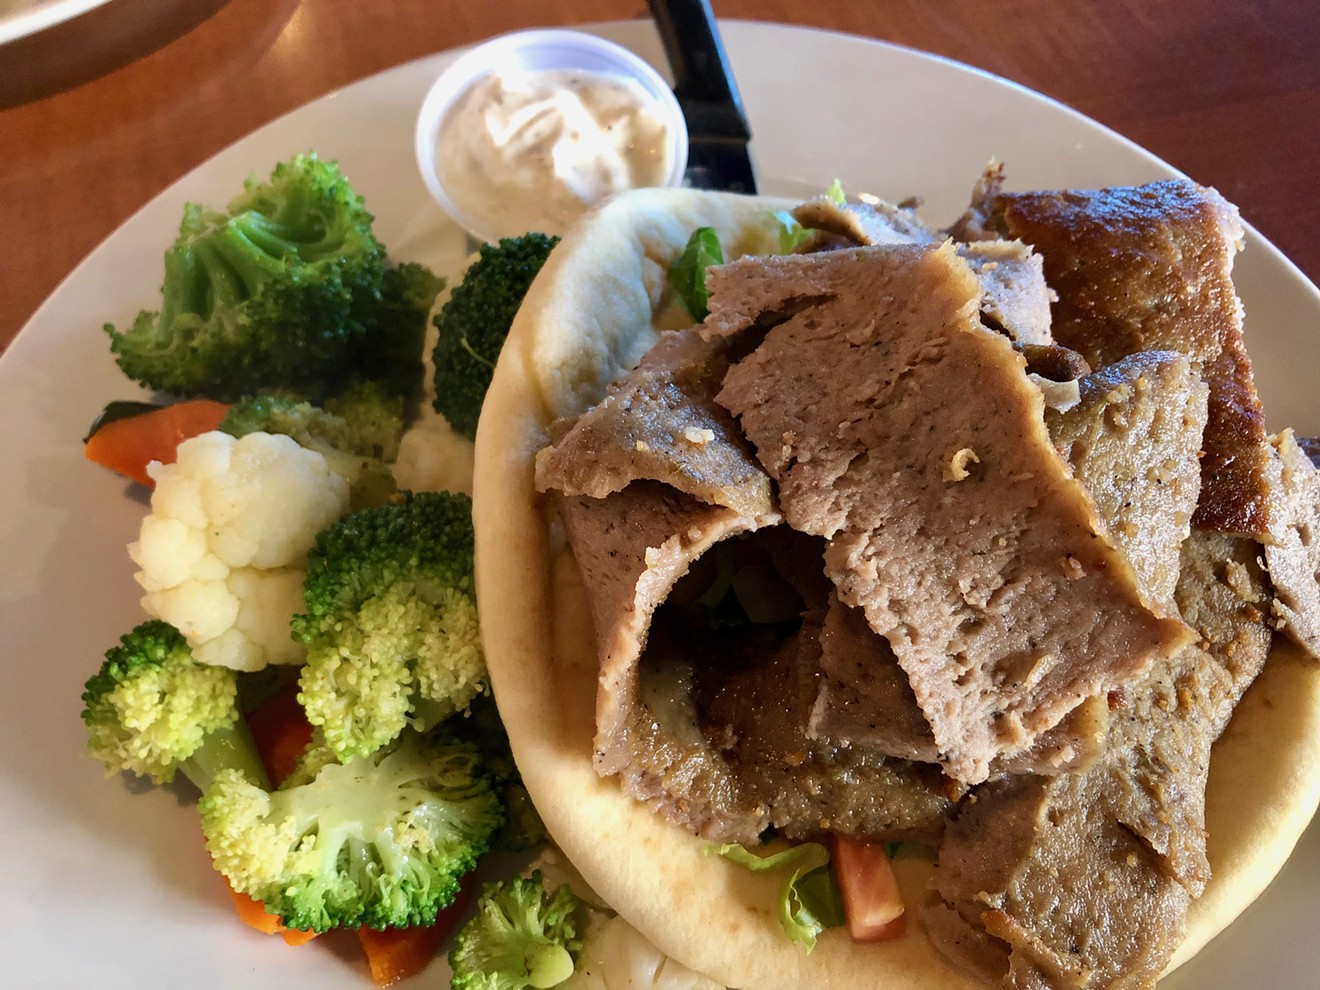 Some menu items, like the gyro dinner, can't be ignored at Dino's.